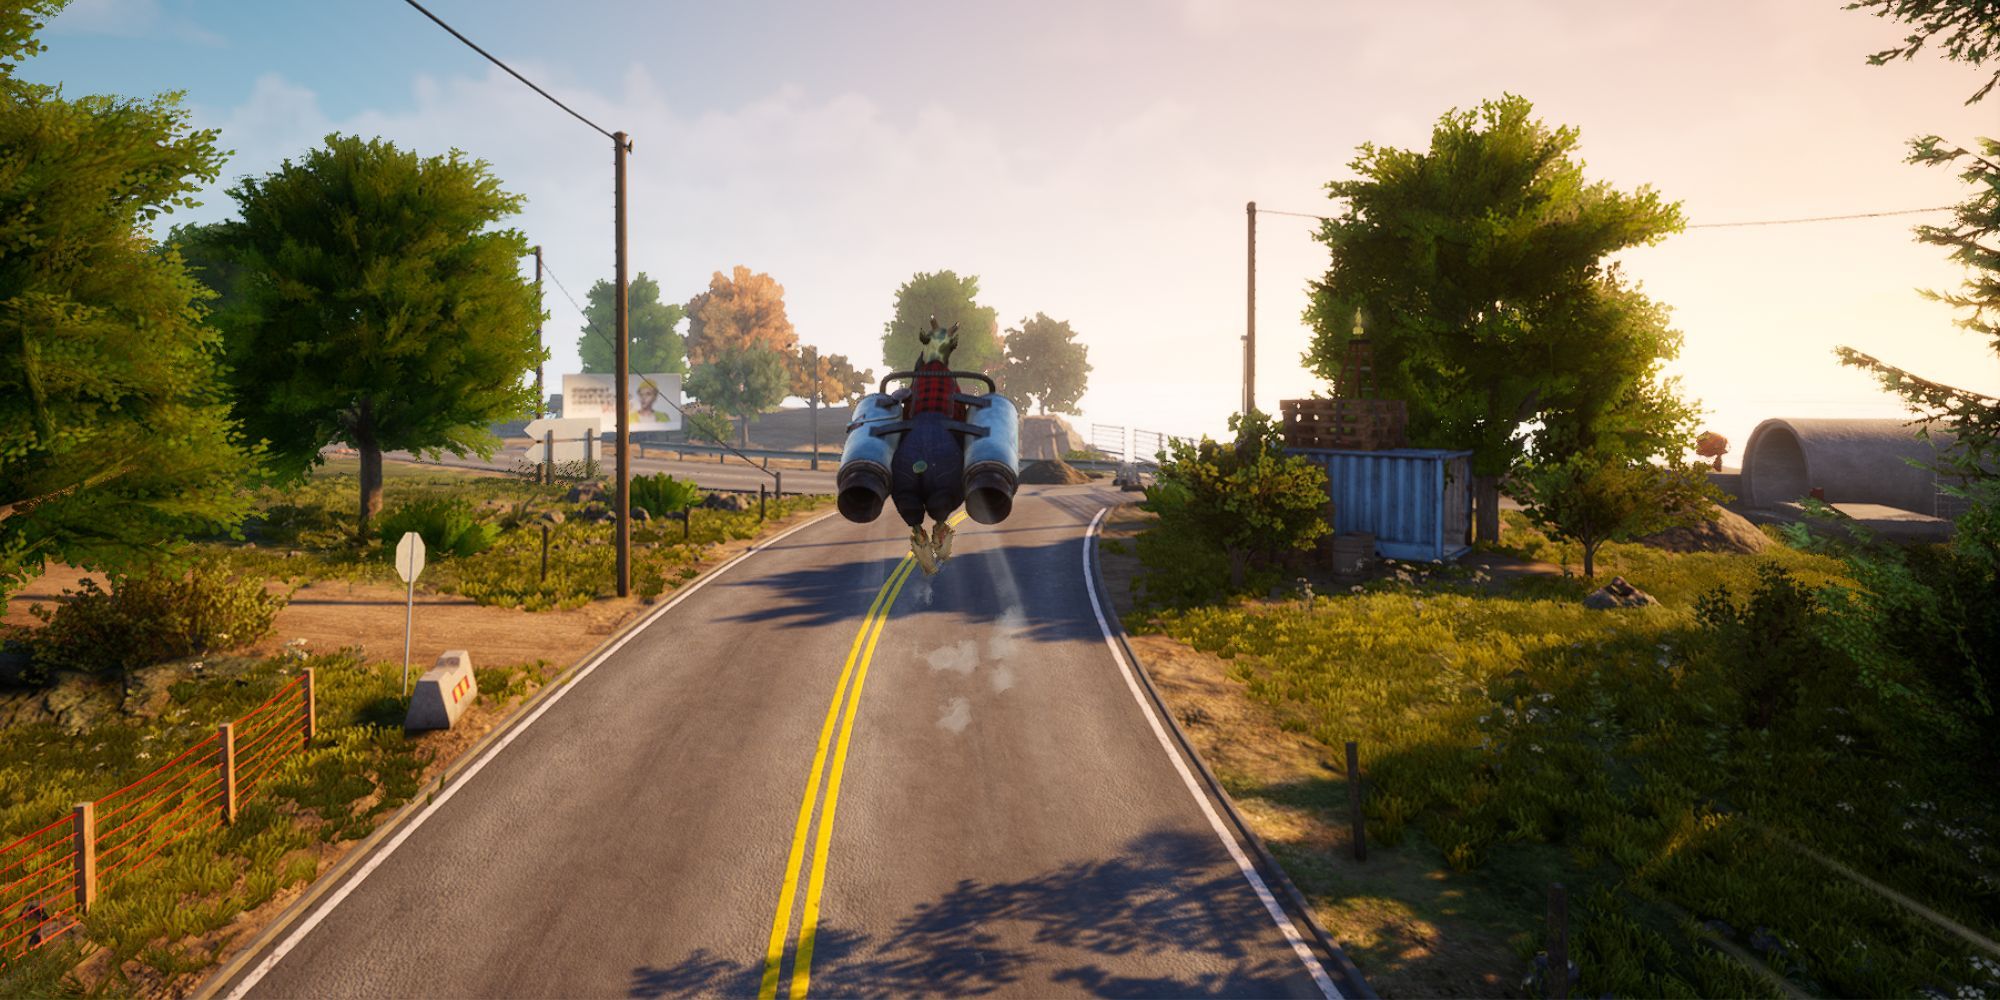 Piglor jumps high on the road while wearing a jetpack